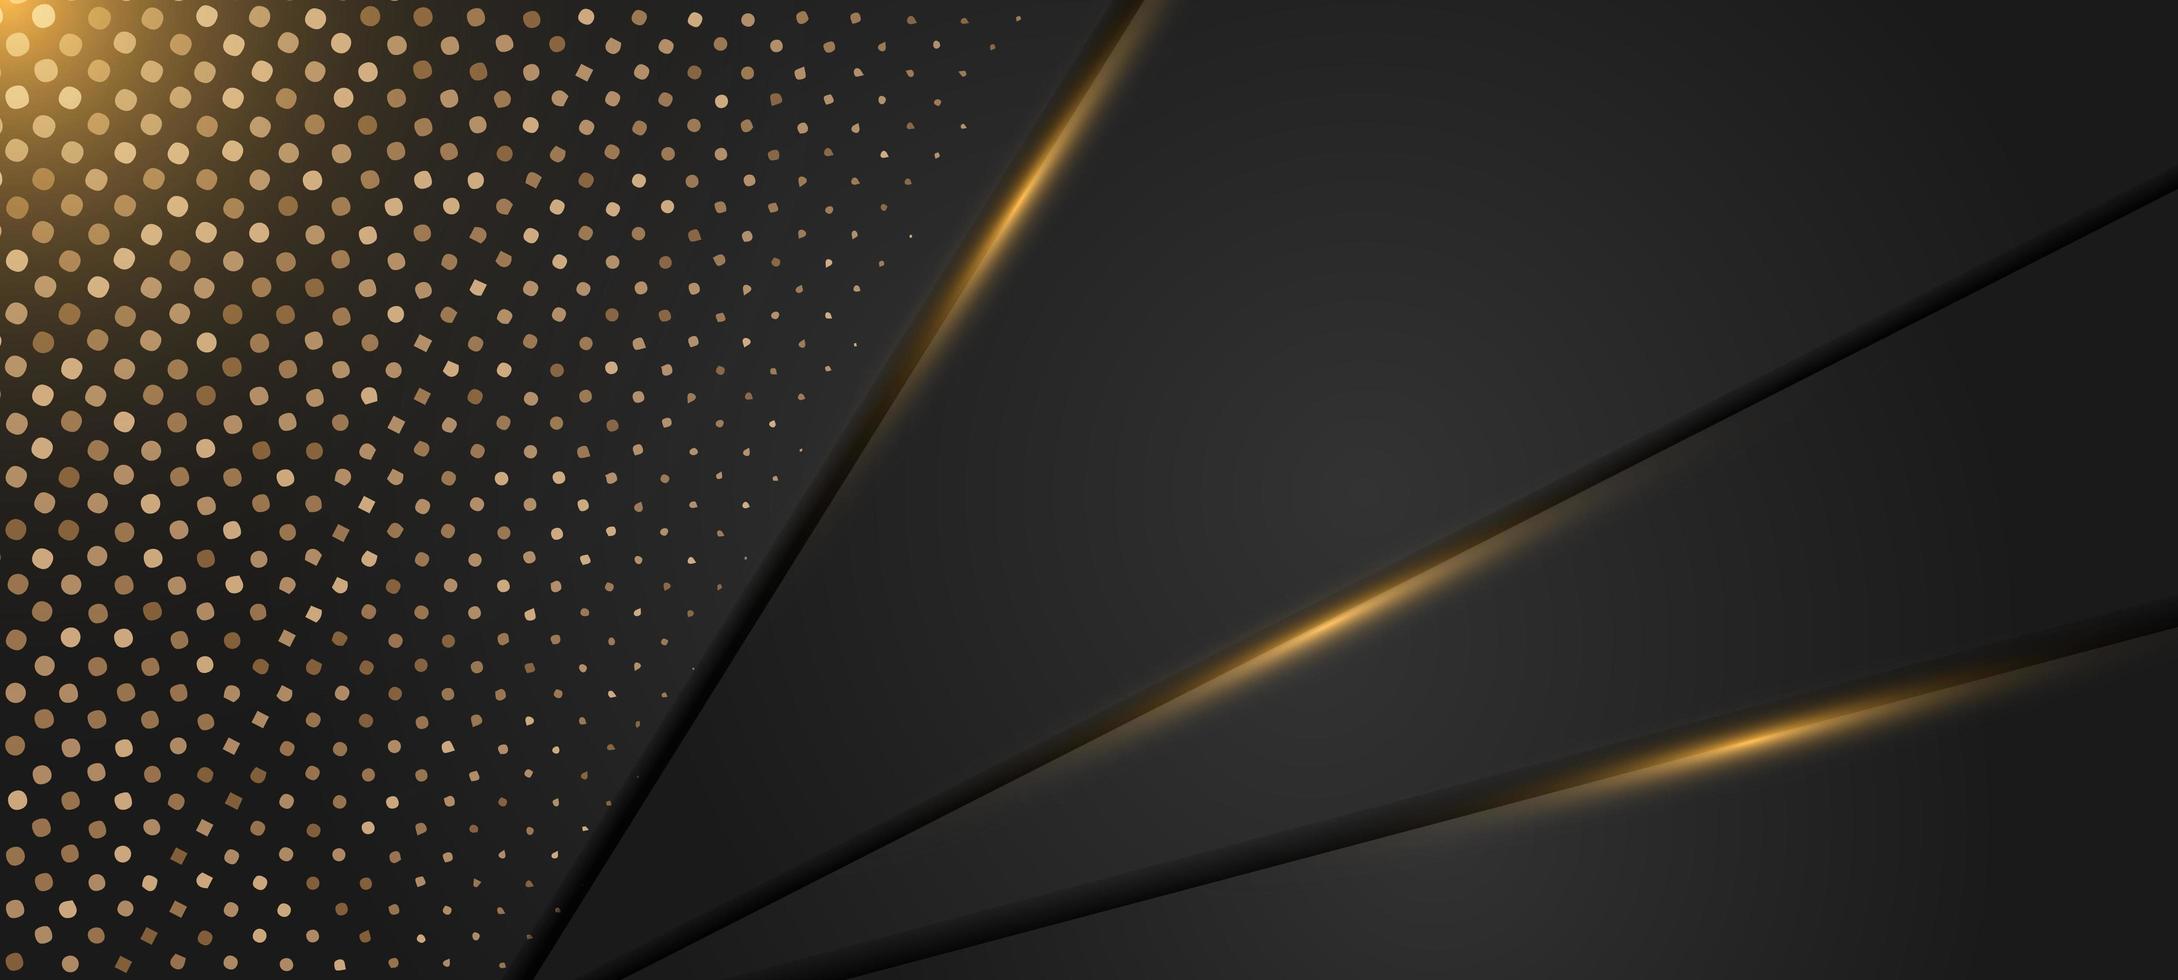 Elegant Gold and Black Dotted Background vector